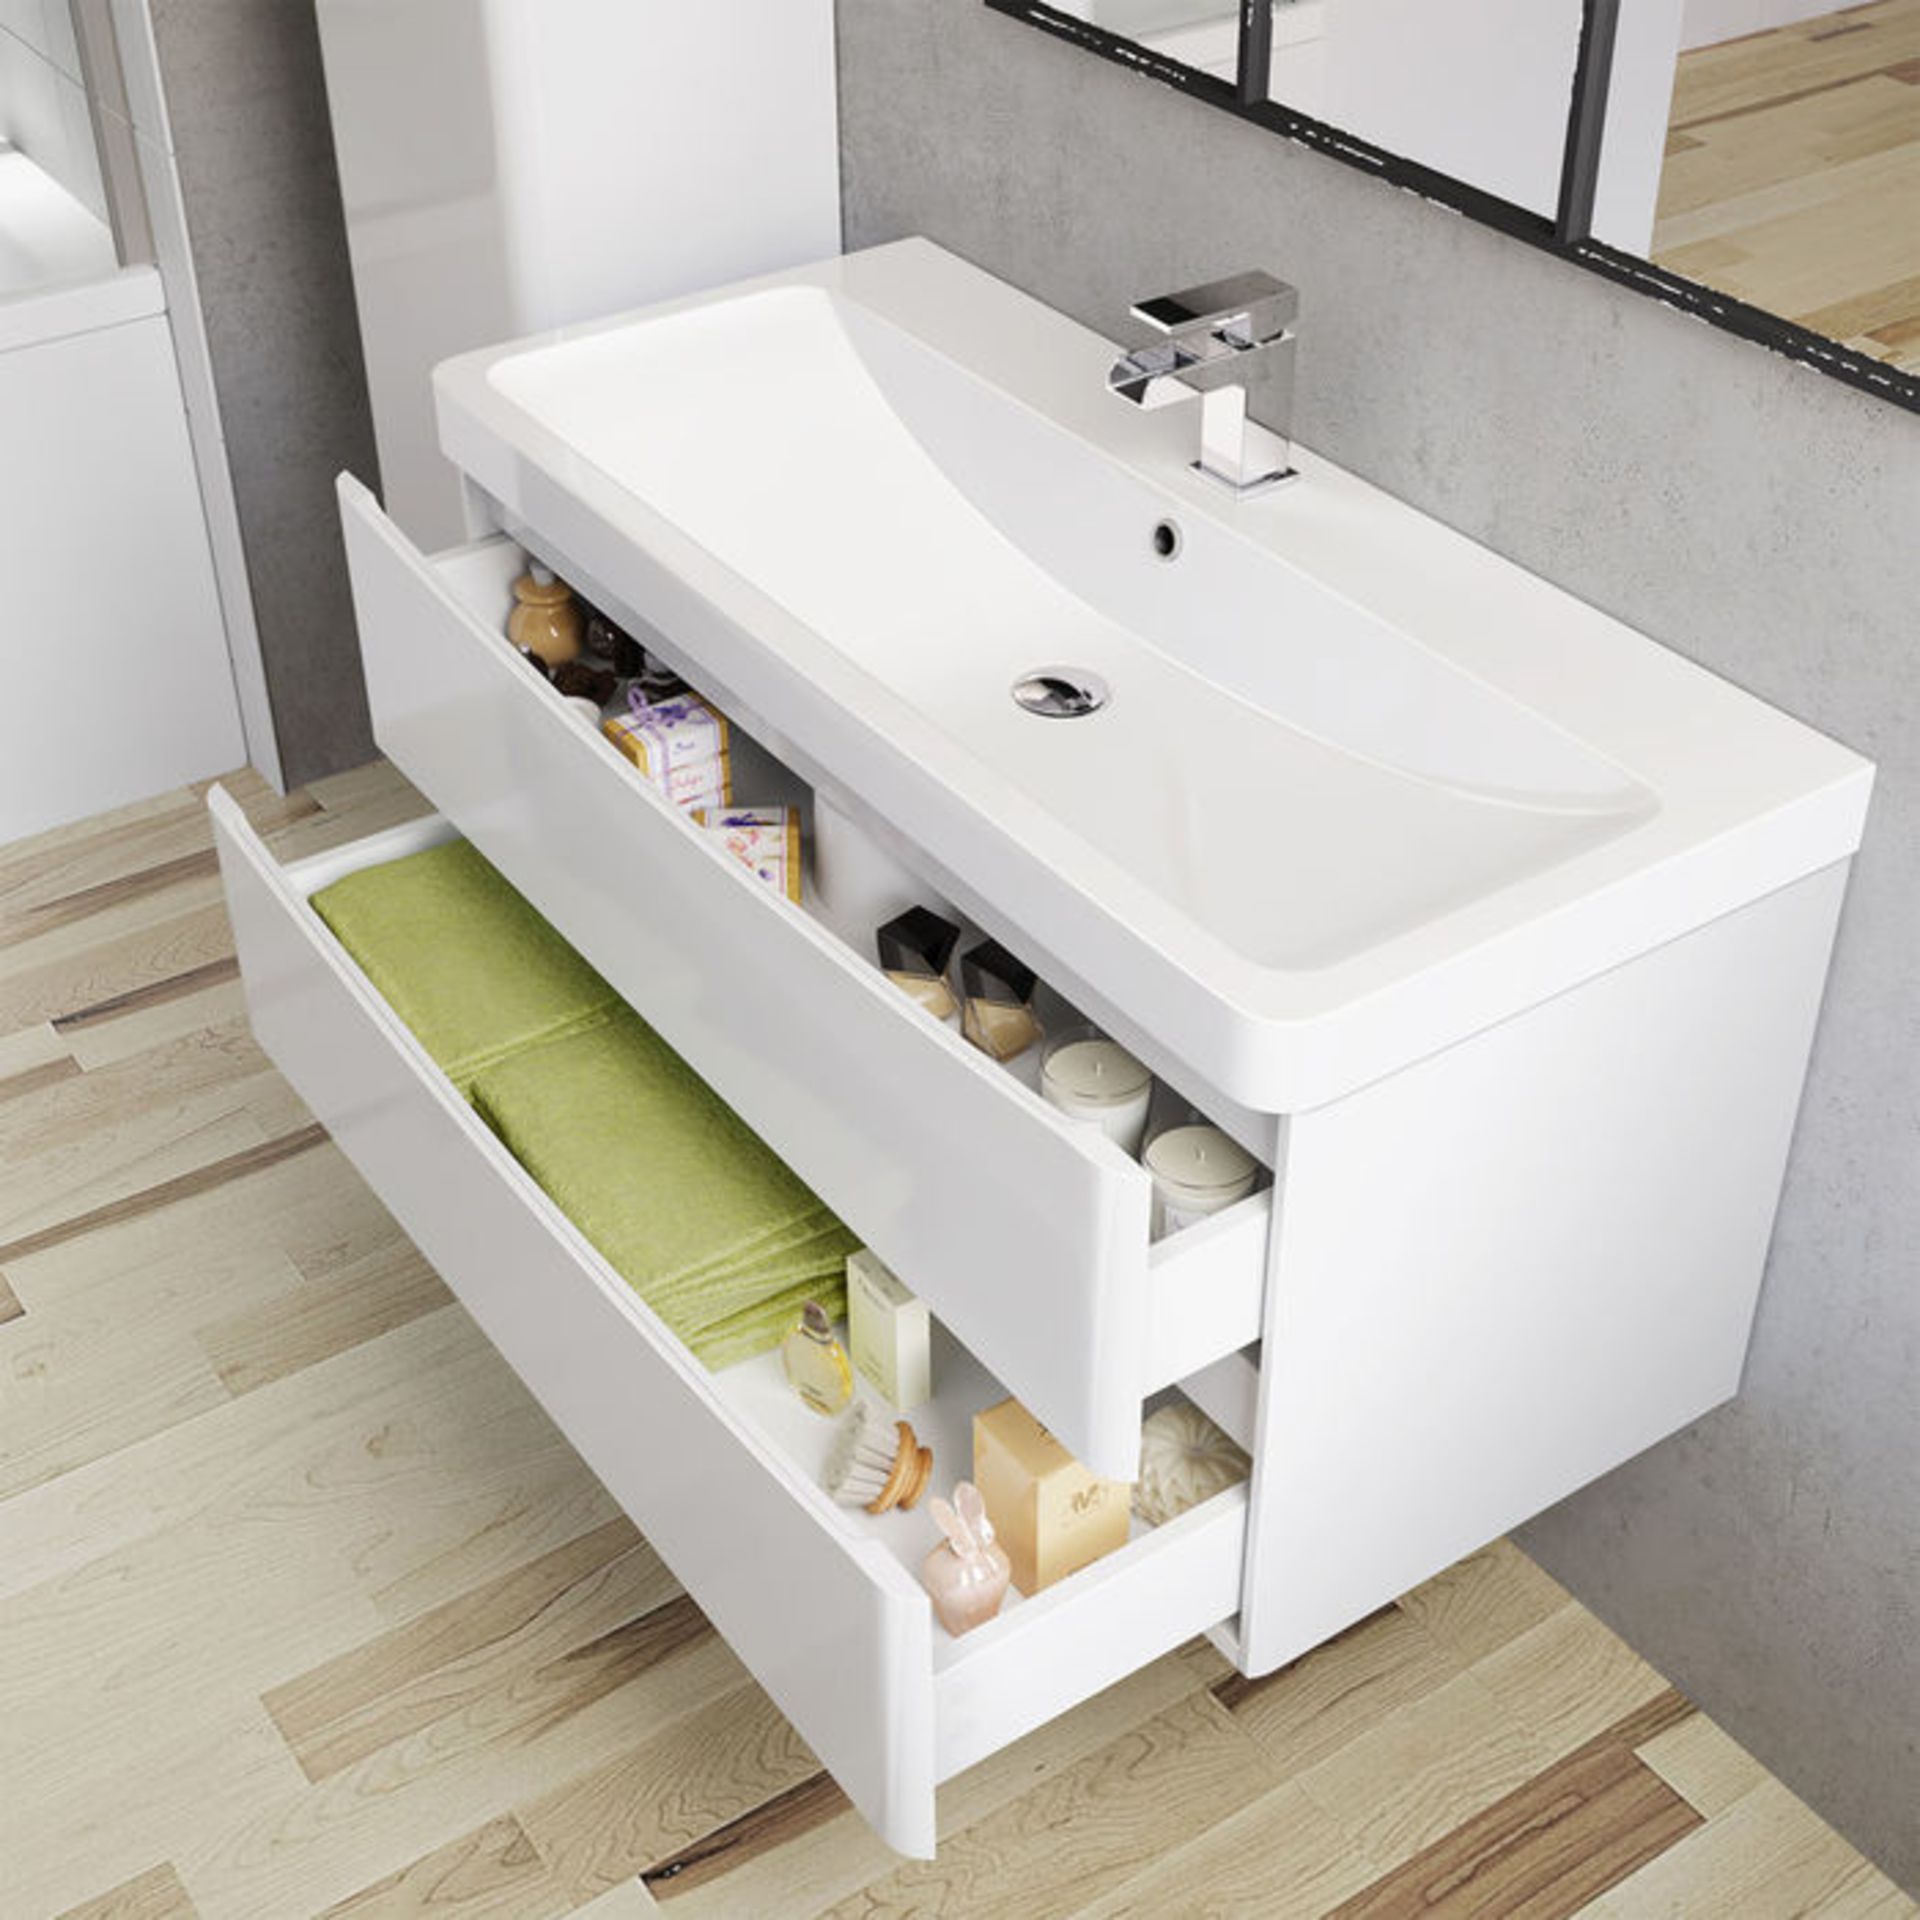 NEW & BOXED 1000mm Austin II Gloss White Built In Basin Drawer Unit - Wall Hung. RRP £999.99.C... - Image 3 of 3